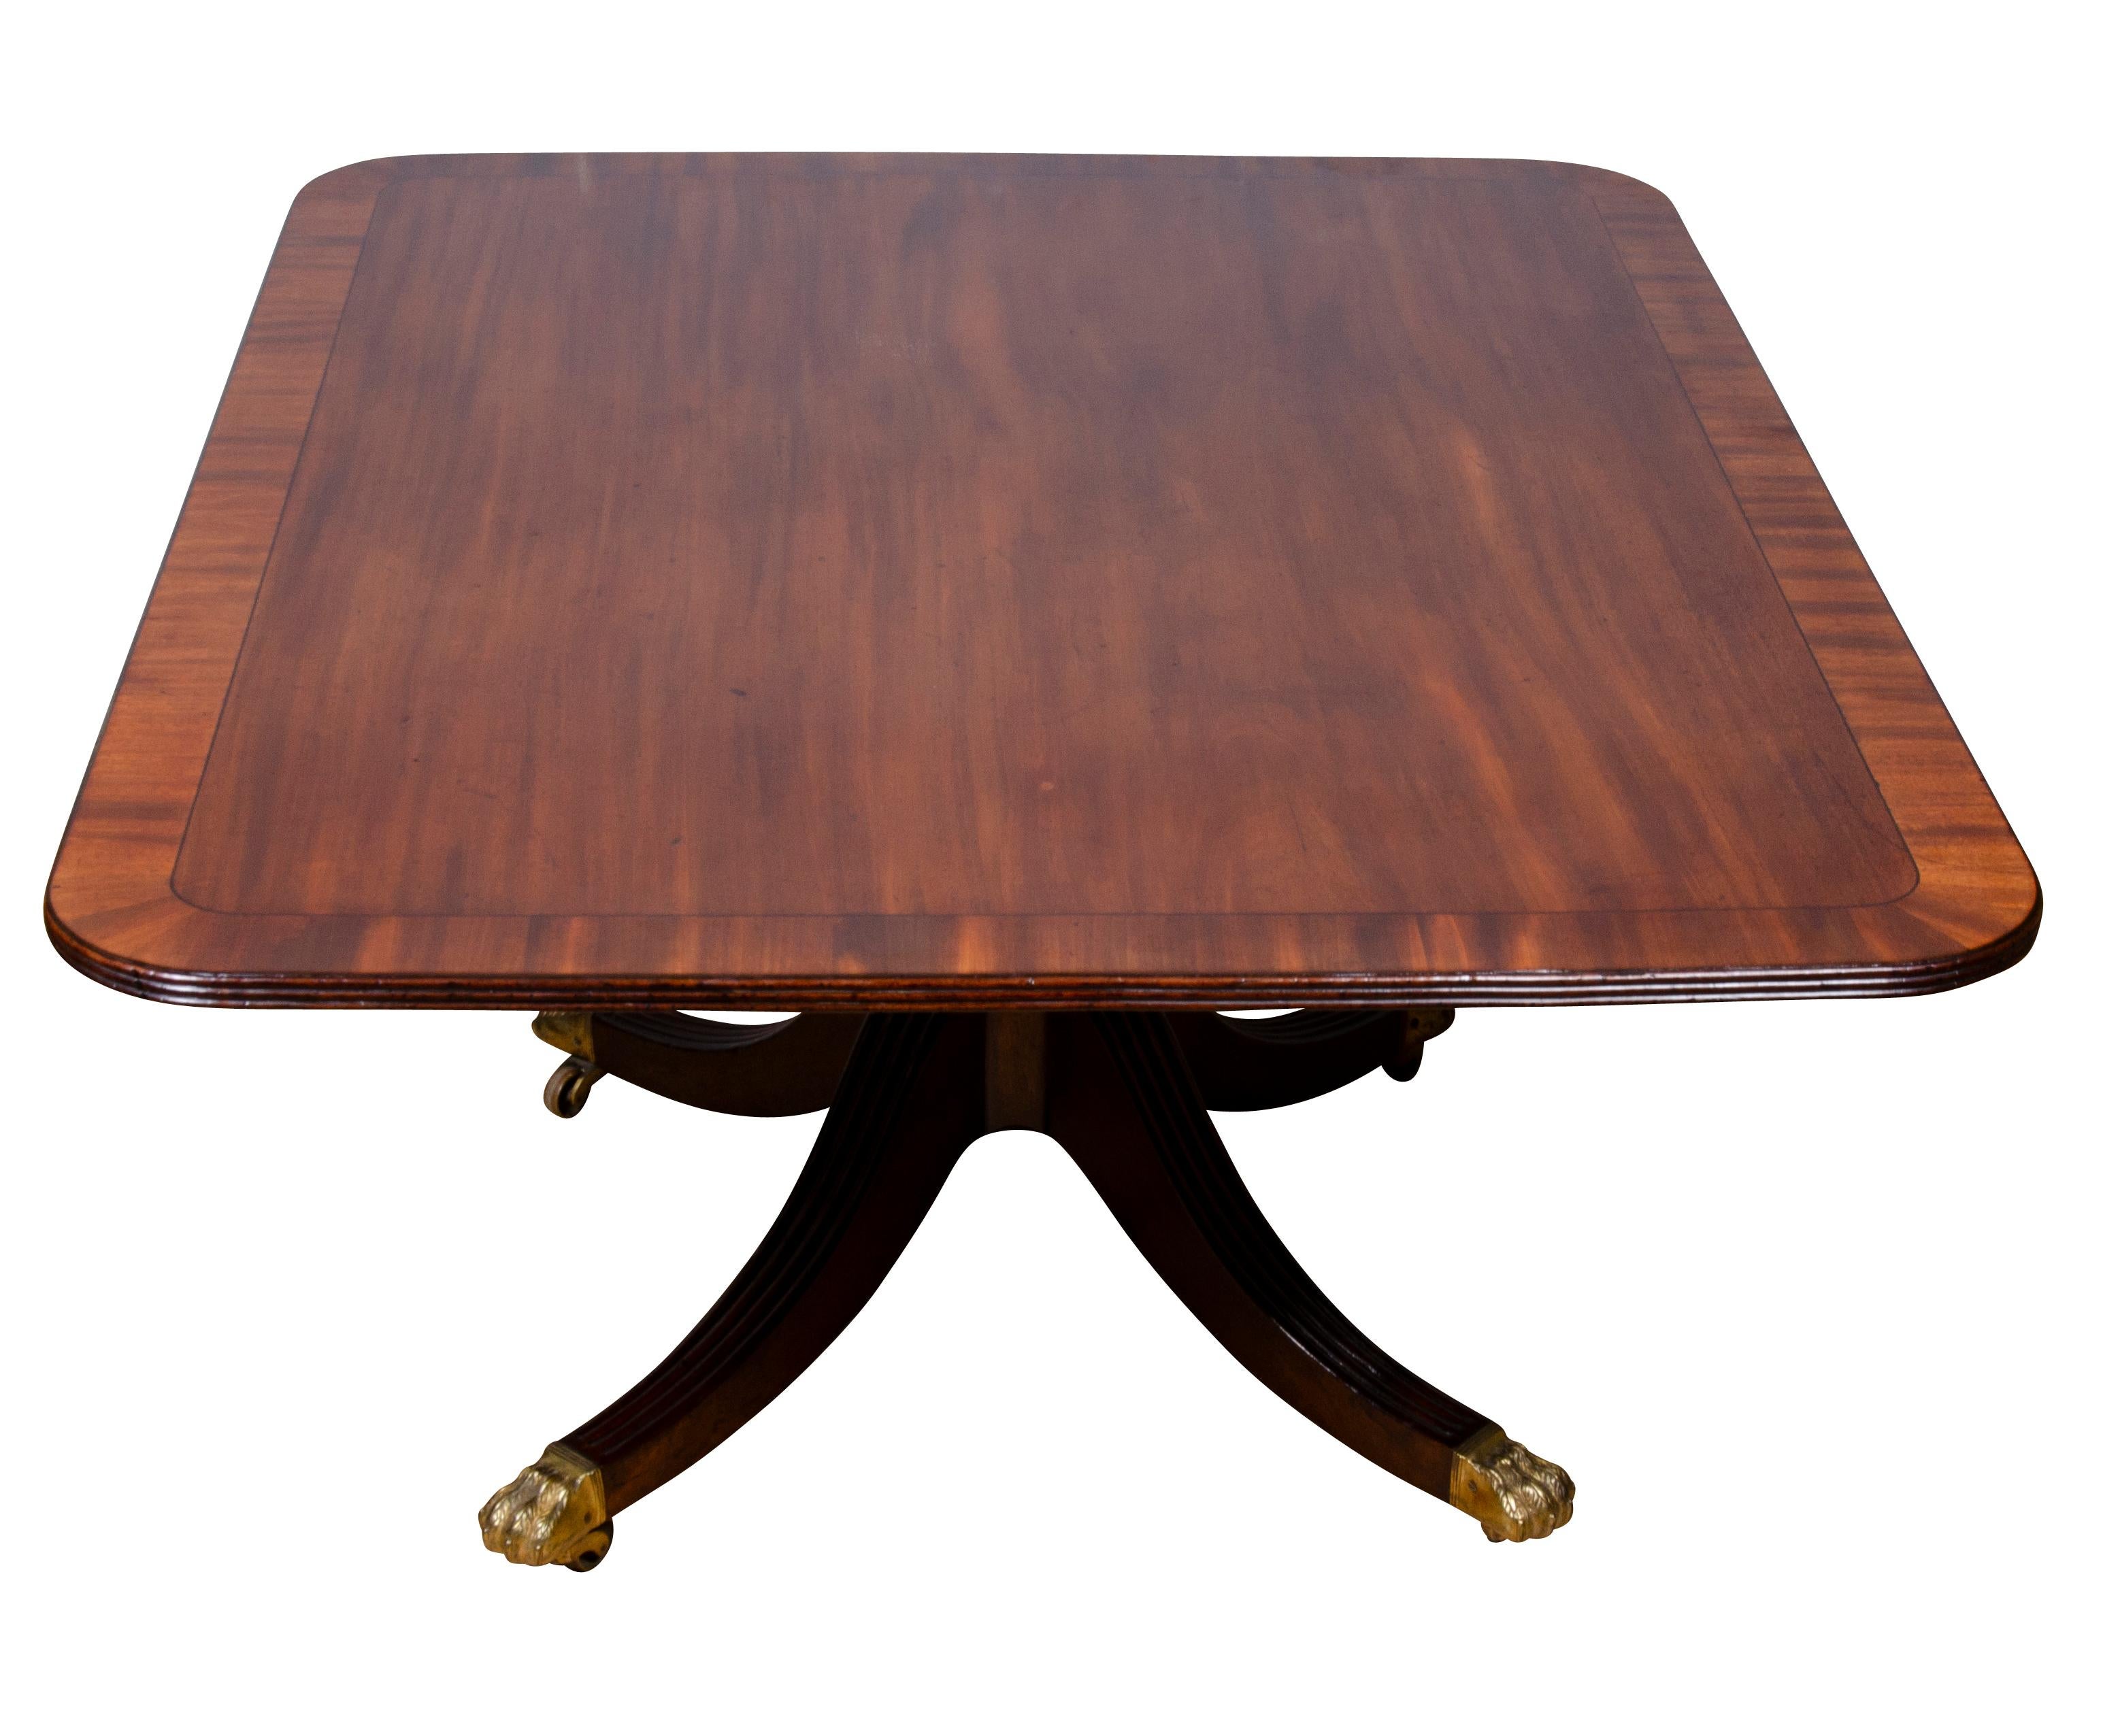 Regency Mahogany Breakfast Table In Good Condition For Sale In Essex, MA